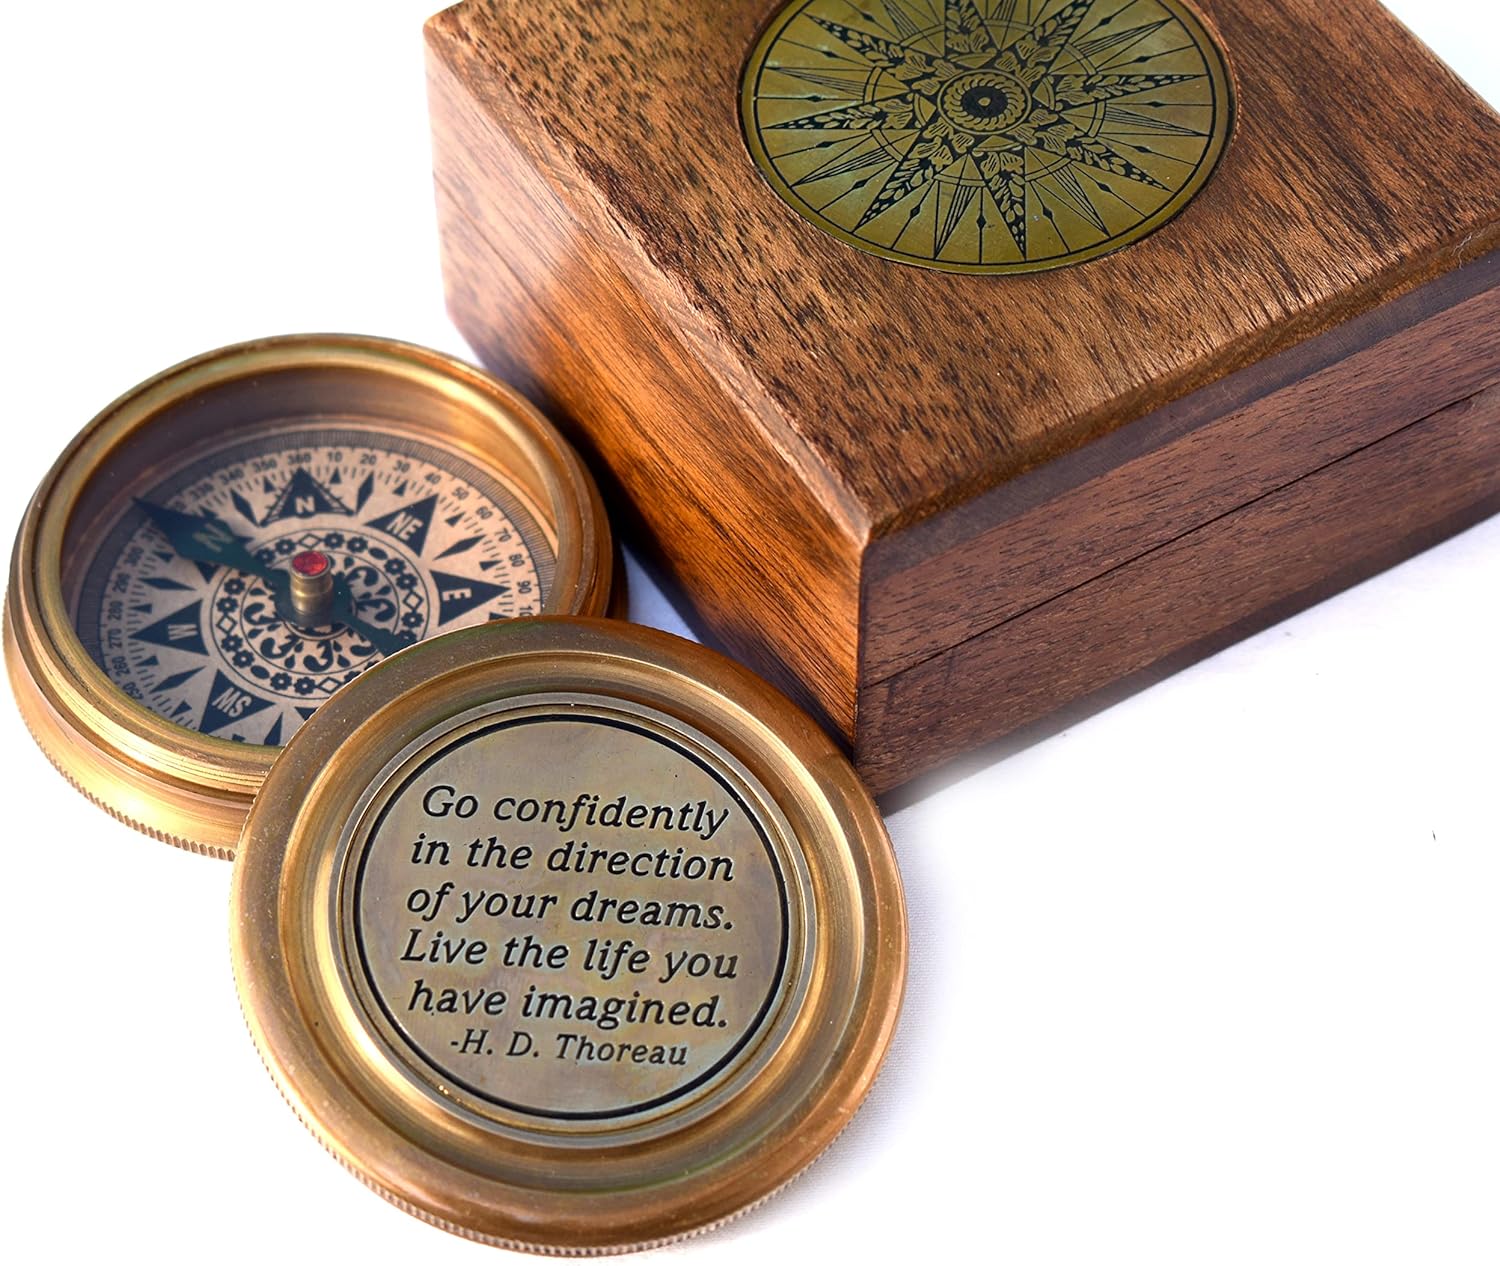 Solid Brass Thoreau' Go Confidently Quote Engraved Compass with Wooden Box, Camping Compass, Baptism Gift, 2023 Graduation Day Gifts, Christian Gifts for Men, First Confirmation Gift